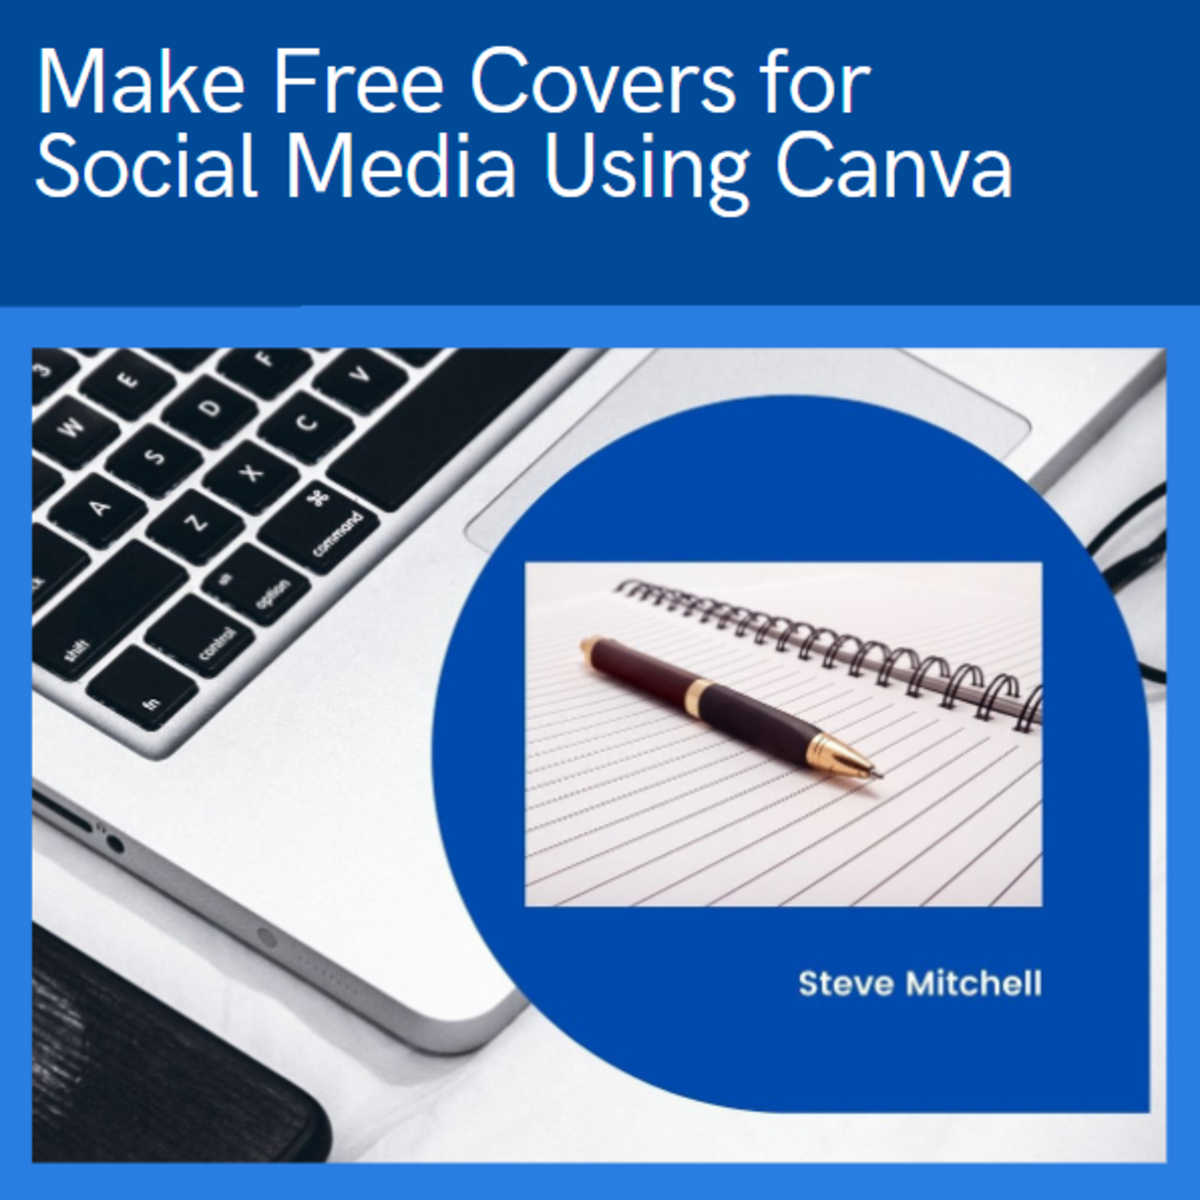 Make Free Covers for Social Media Using Canva